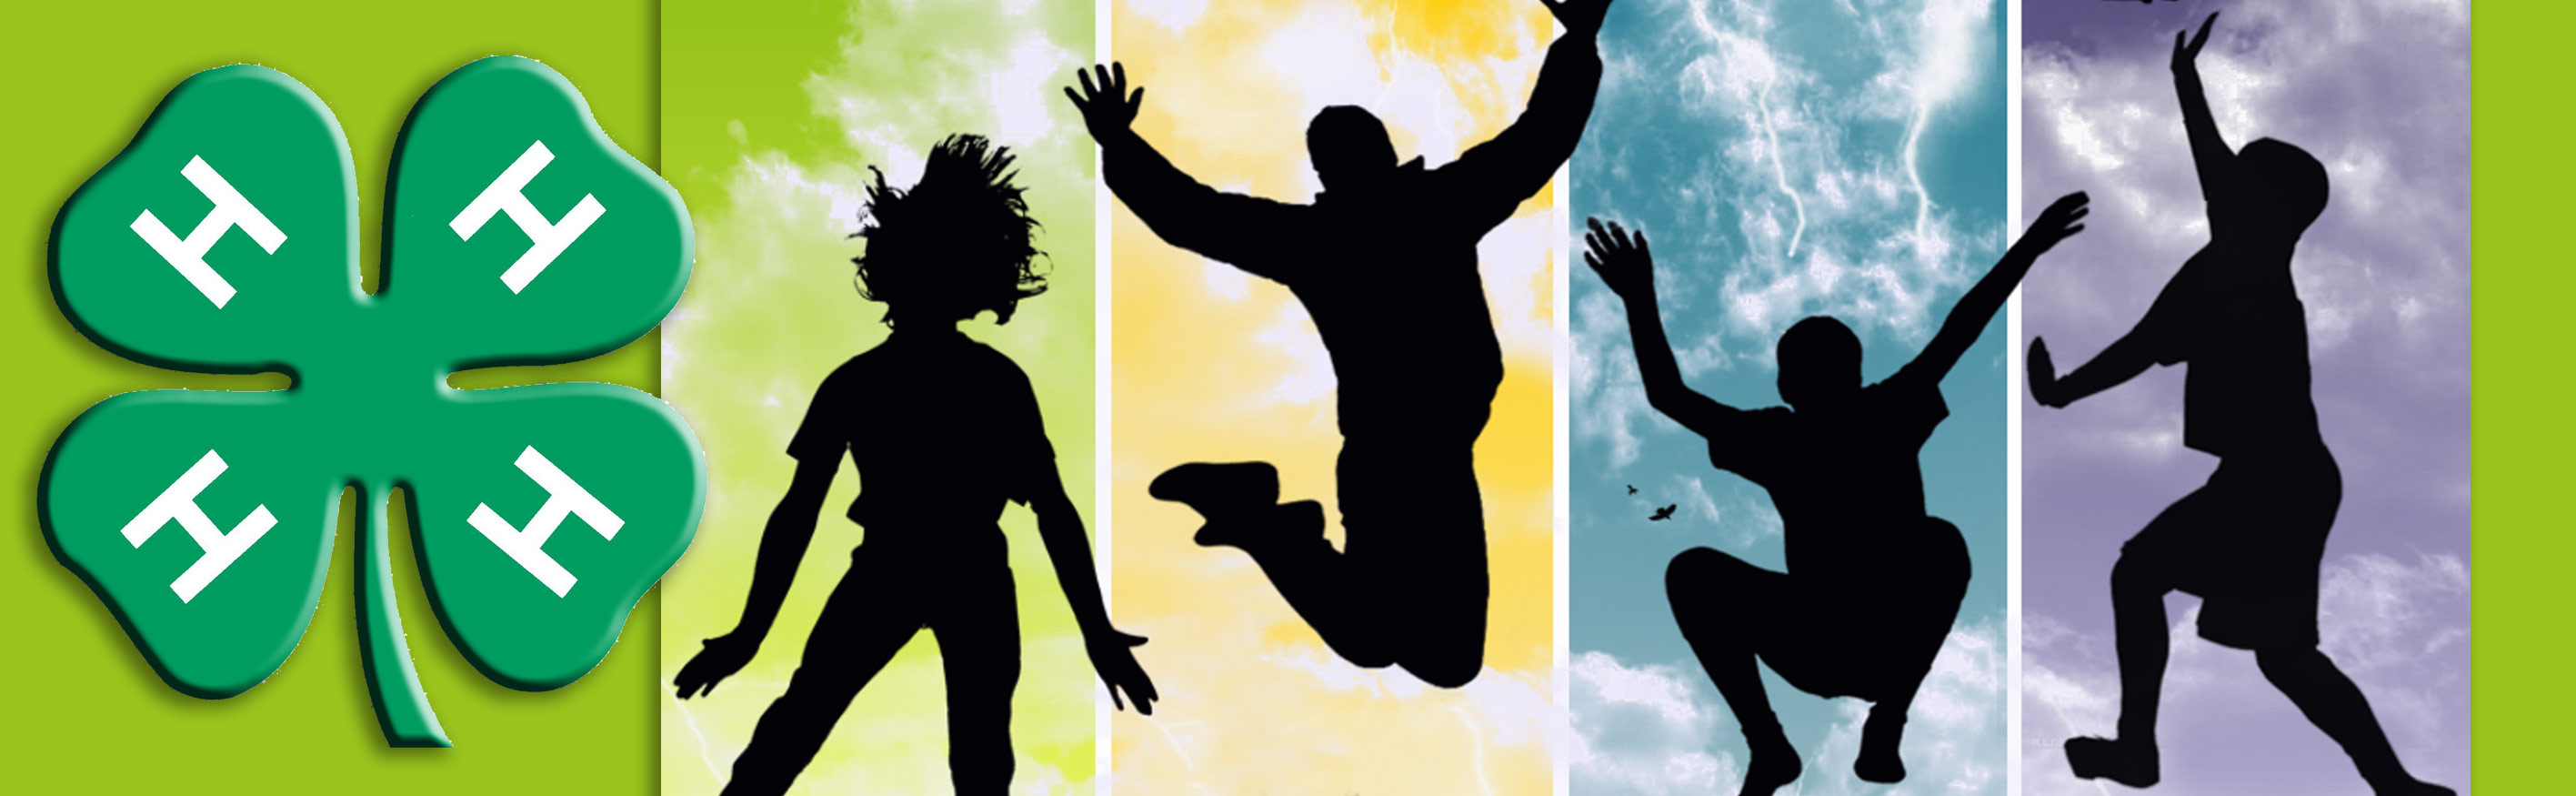 4-H logo and silhouettes of people jumping